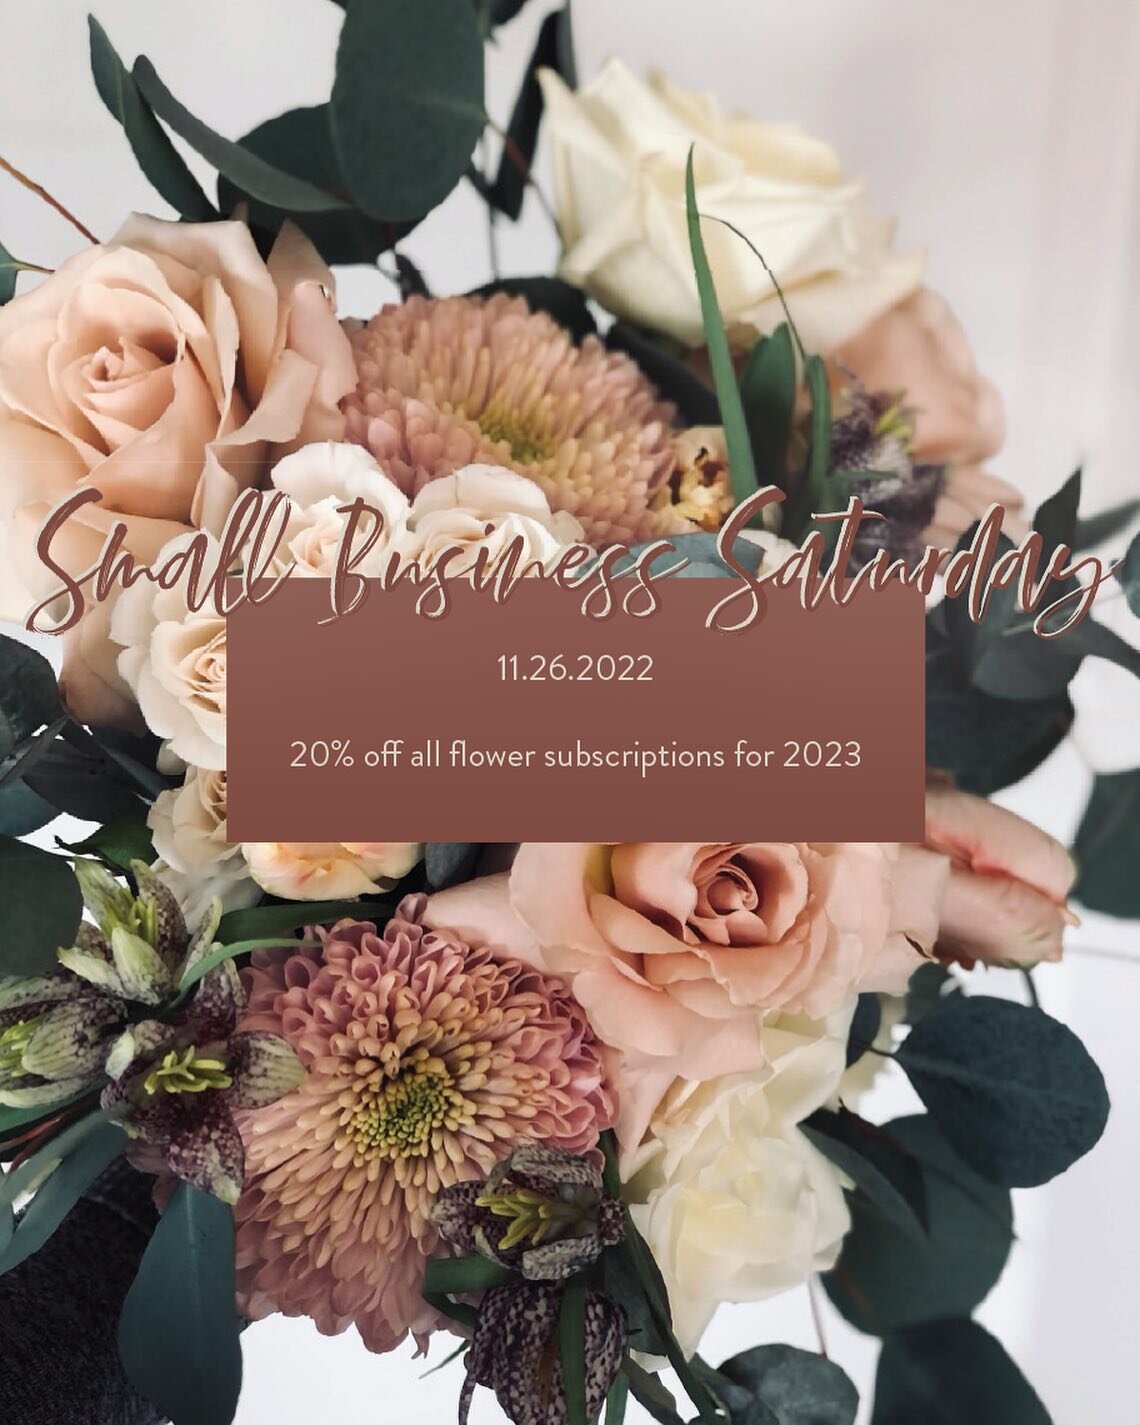 We love all the support we get as a small business, so this Saturday you&rsquo;ll receive 20% off all 2023 flower subscriptions whether you&rsquo;re looking to do 3, 6 or 12 months! The gift that keeps on giving, month after month after month after m